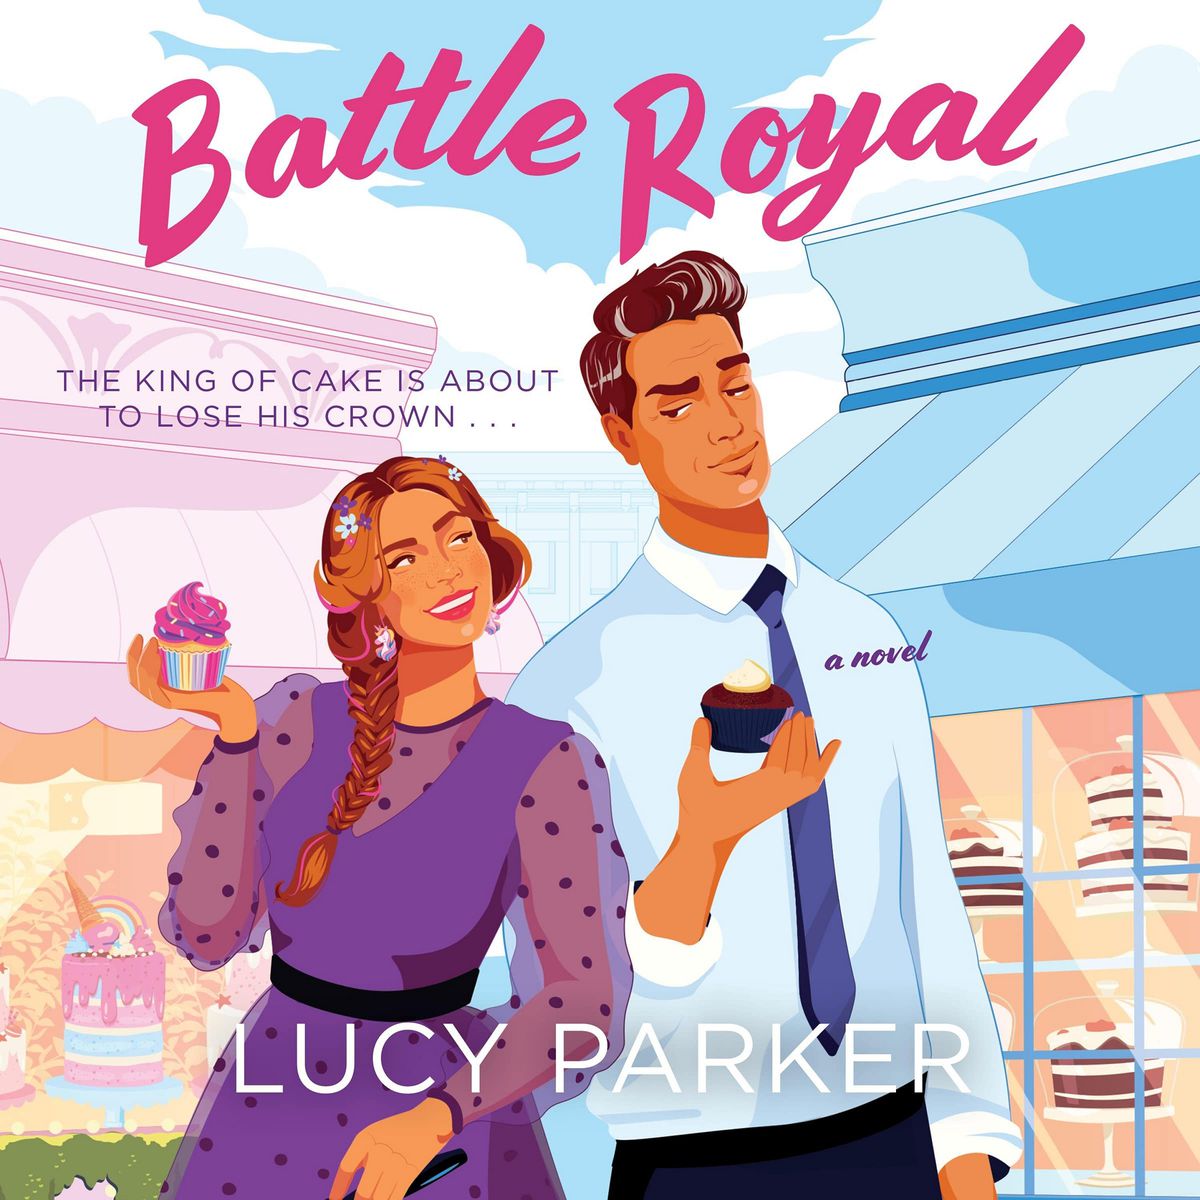 Cover art for Battle Royal, featuring a woman and a man holding cupcakes